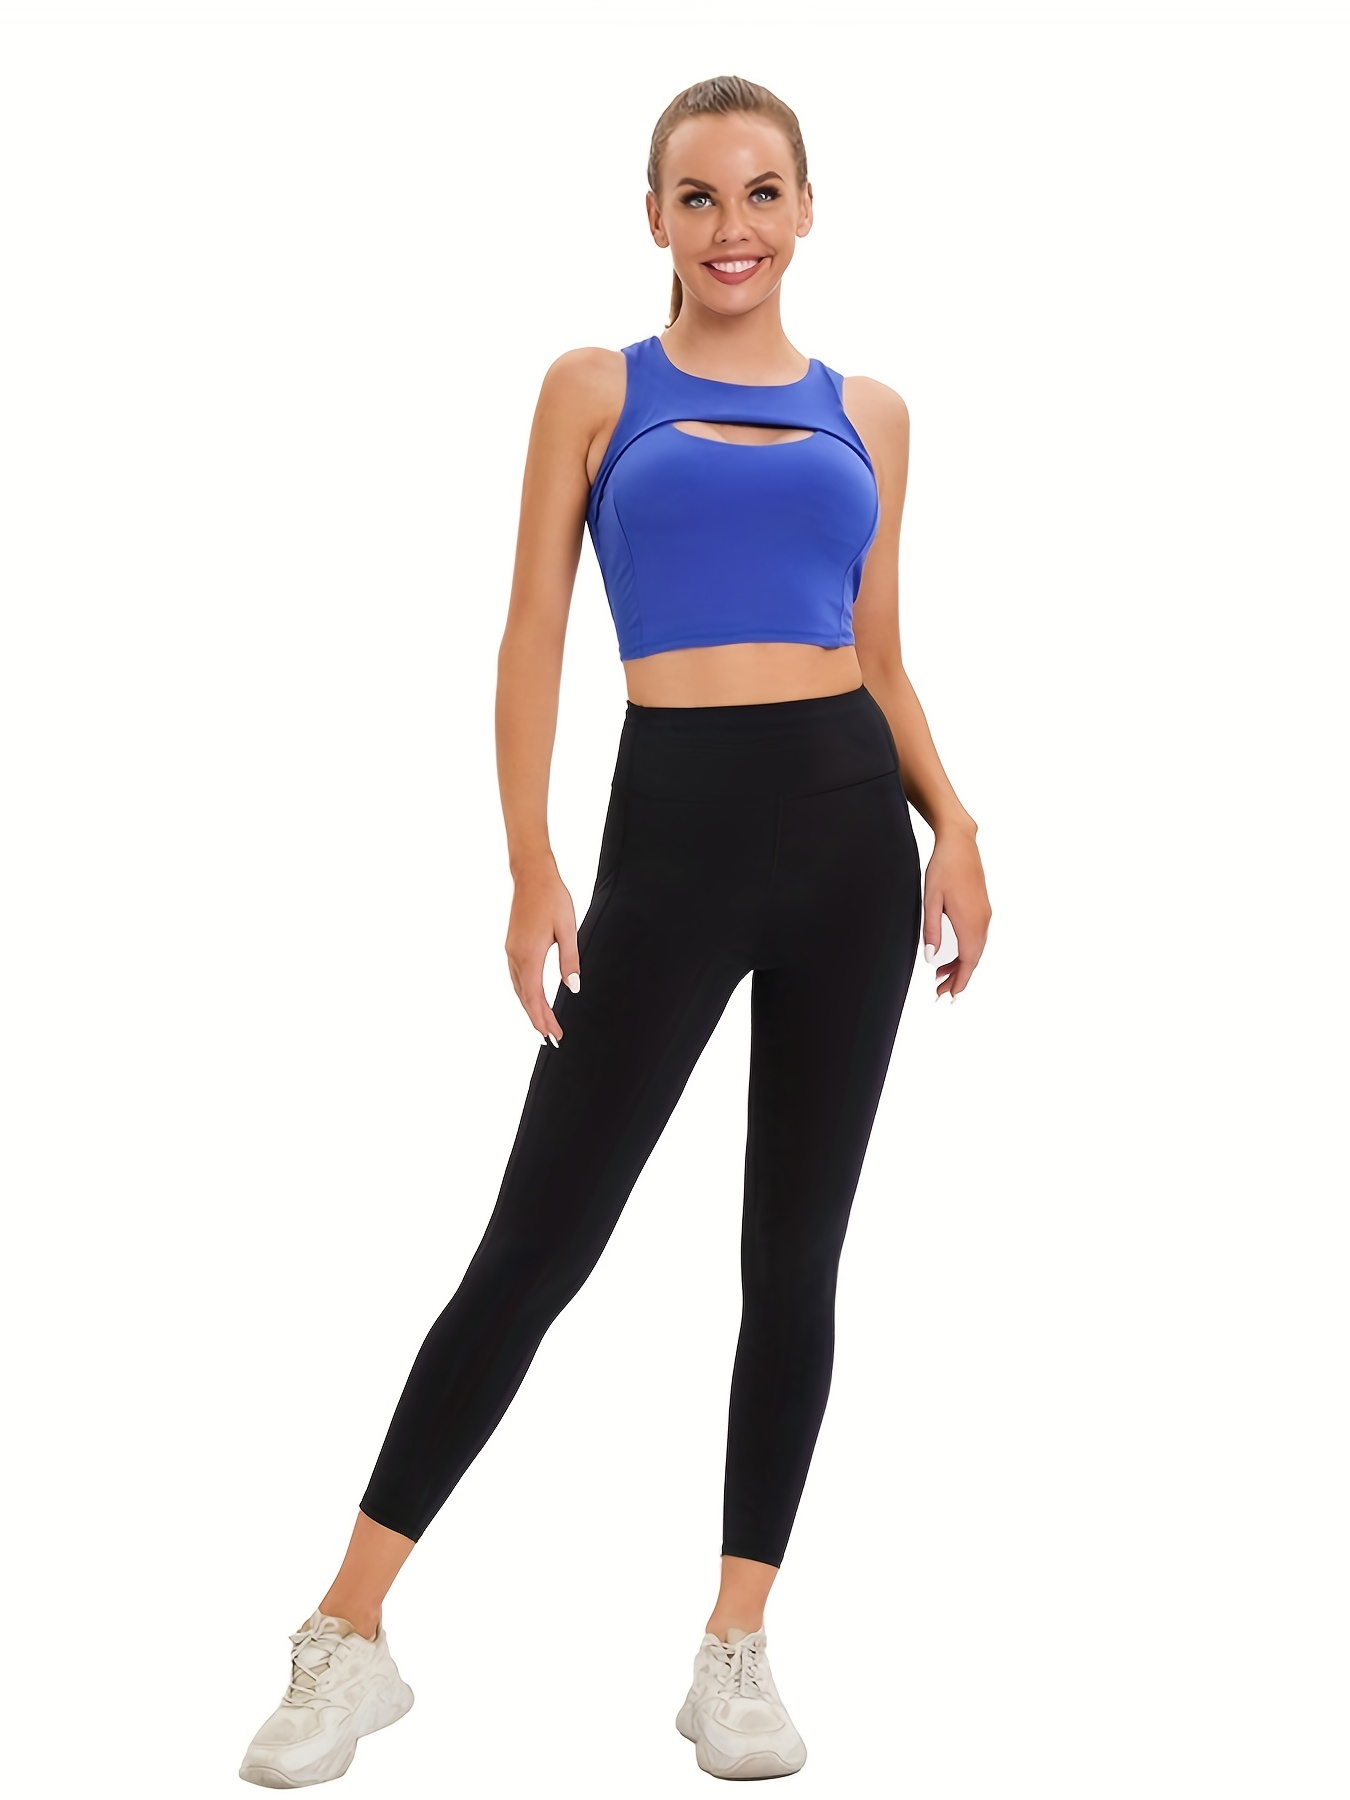 Women's Activewear: Solid Color High Impact Yoga Sports Bra